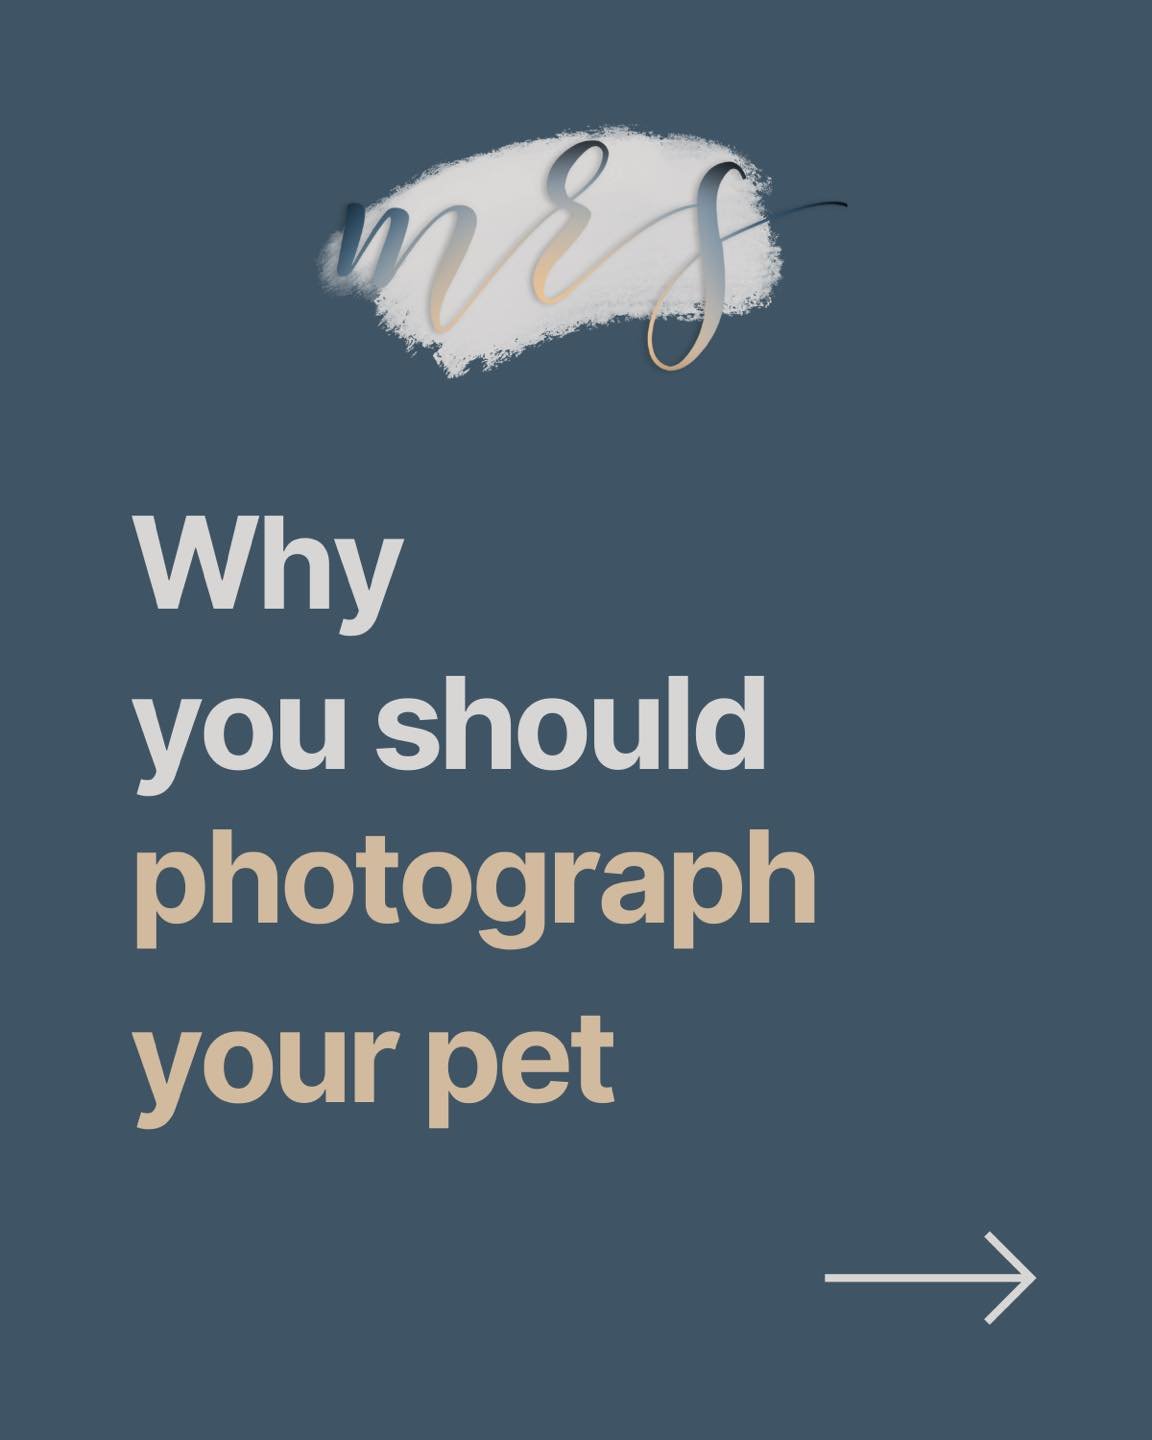 What&rsquo;s your reason for photographing your pet today? 🐾

#nationalpetday #pets #petlovers #petphotography  #artistsofinstagram #photographychallenge #photography